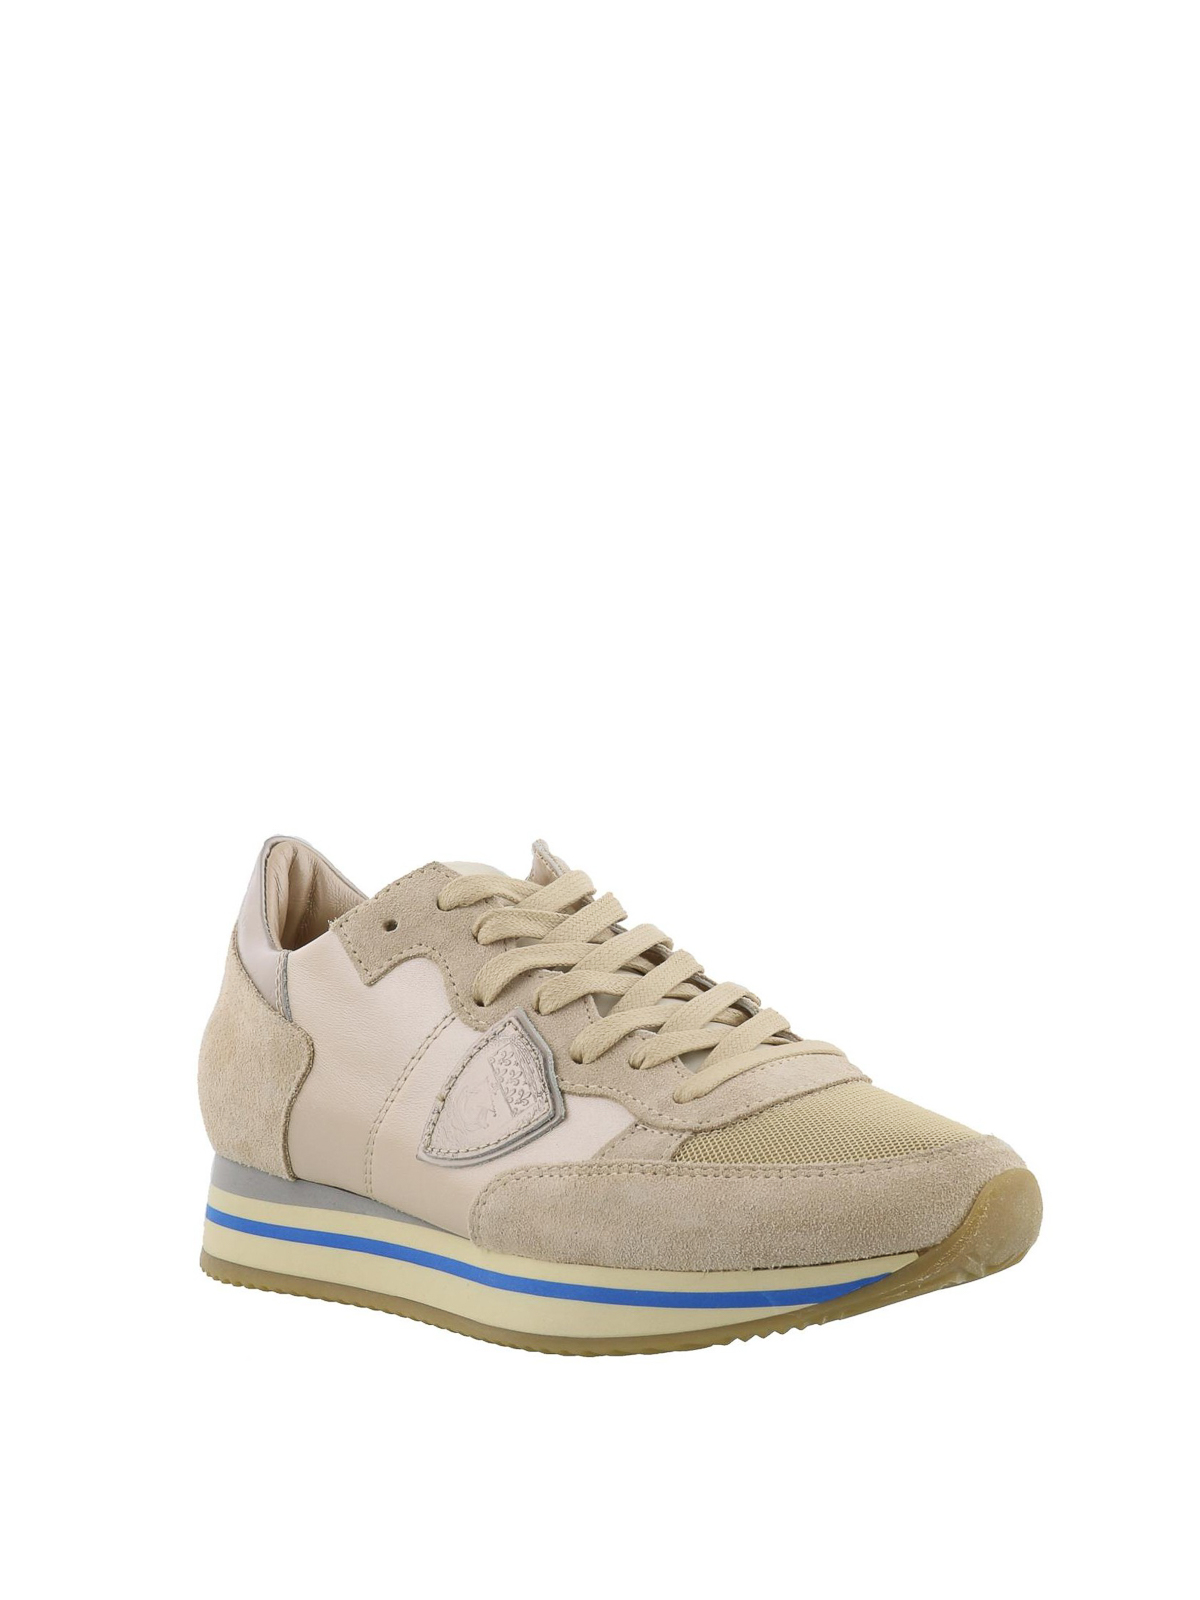 Trainers Philippe Model - Tropez Higher beige suede sneakers - THLDPE04